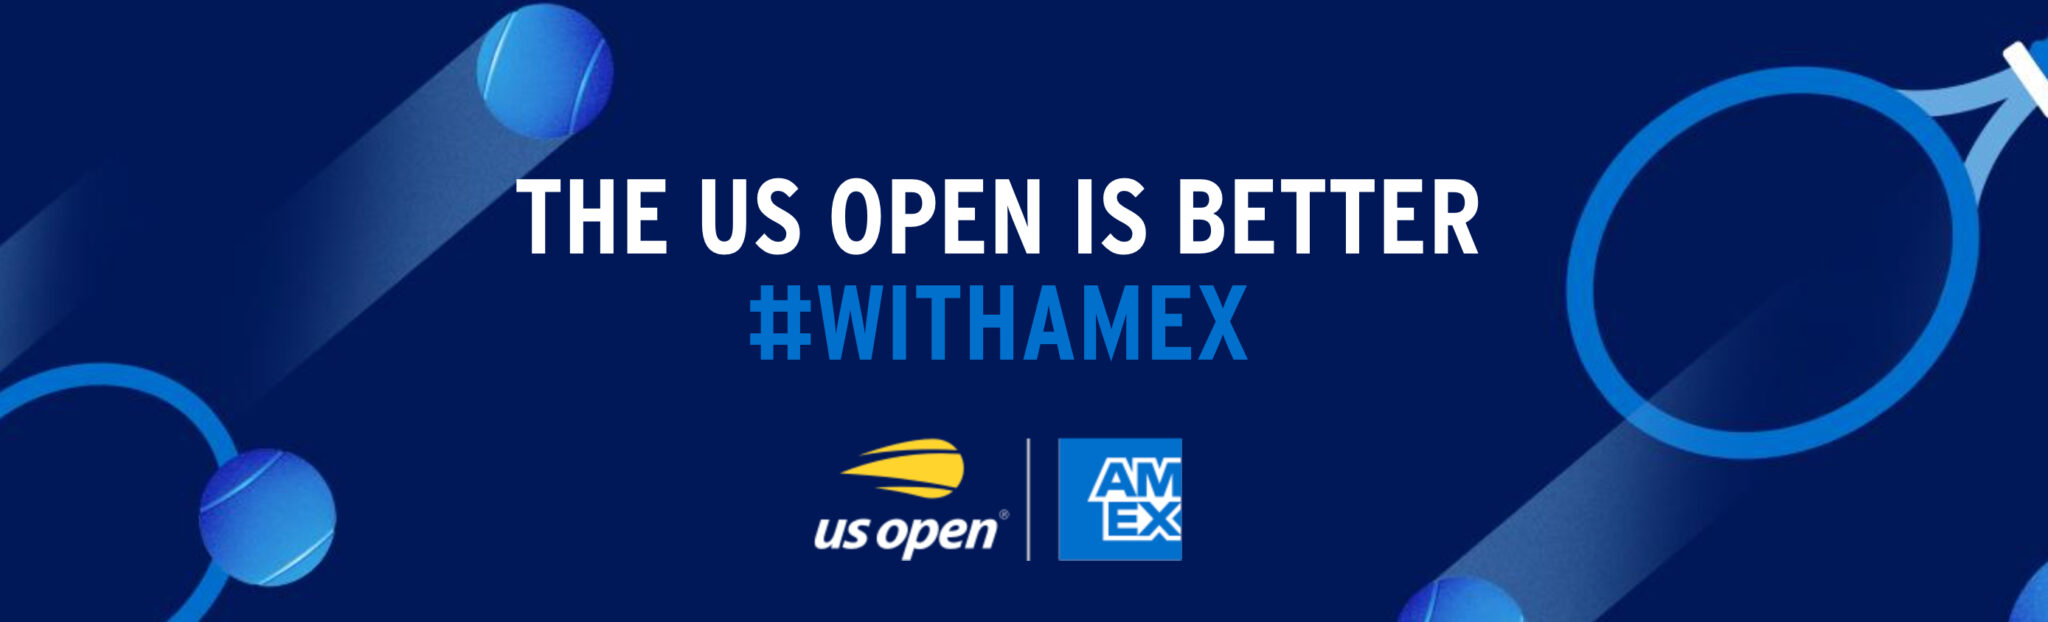 American Express Offers Lounges and Other Perks at the US Open The